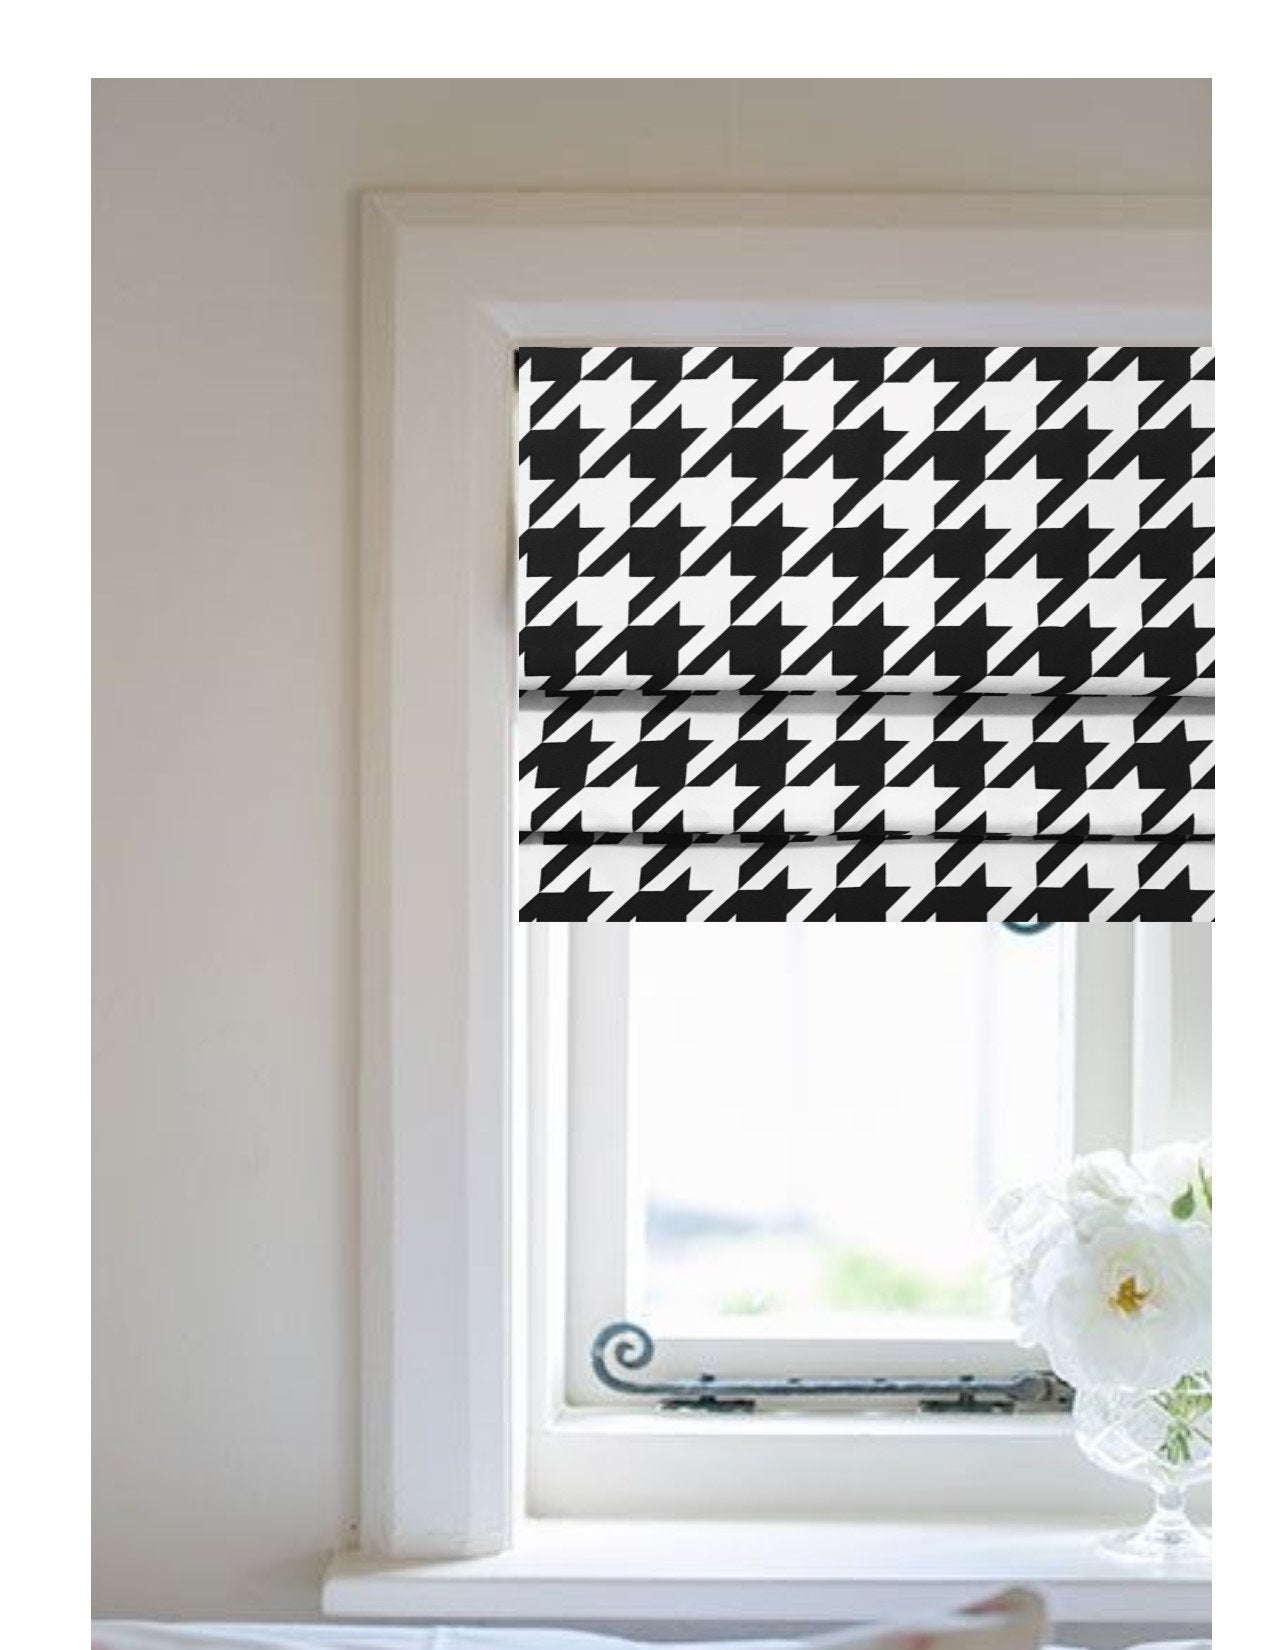 Faux Roman Shade Valance in Modern Black & White Jumbo Houndstooth Print, Premium Cotton Linen, Fully Lined, Custom Made  Valance